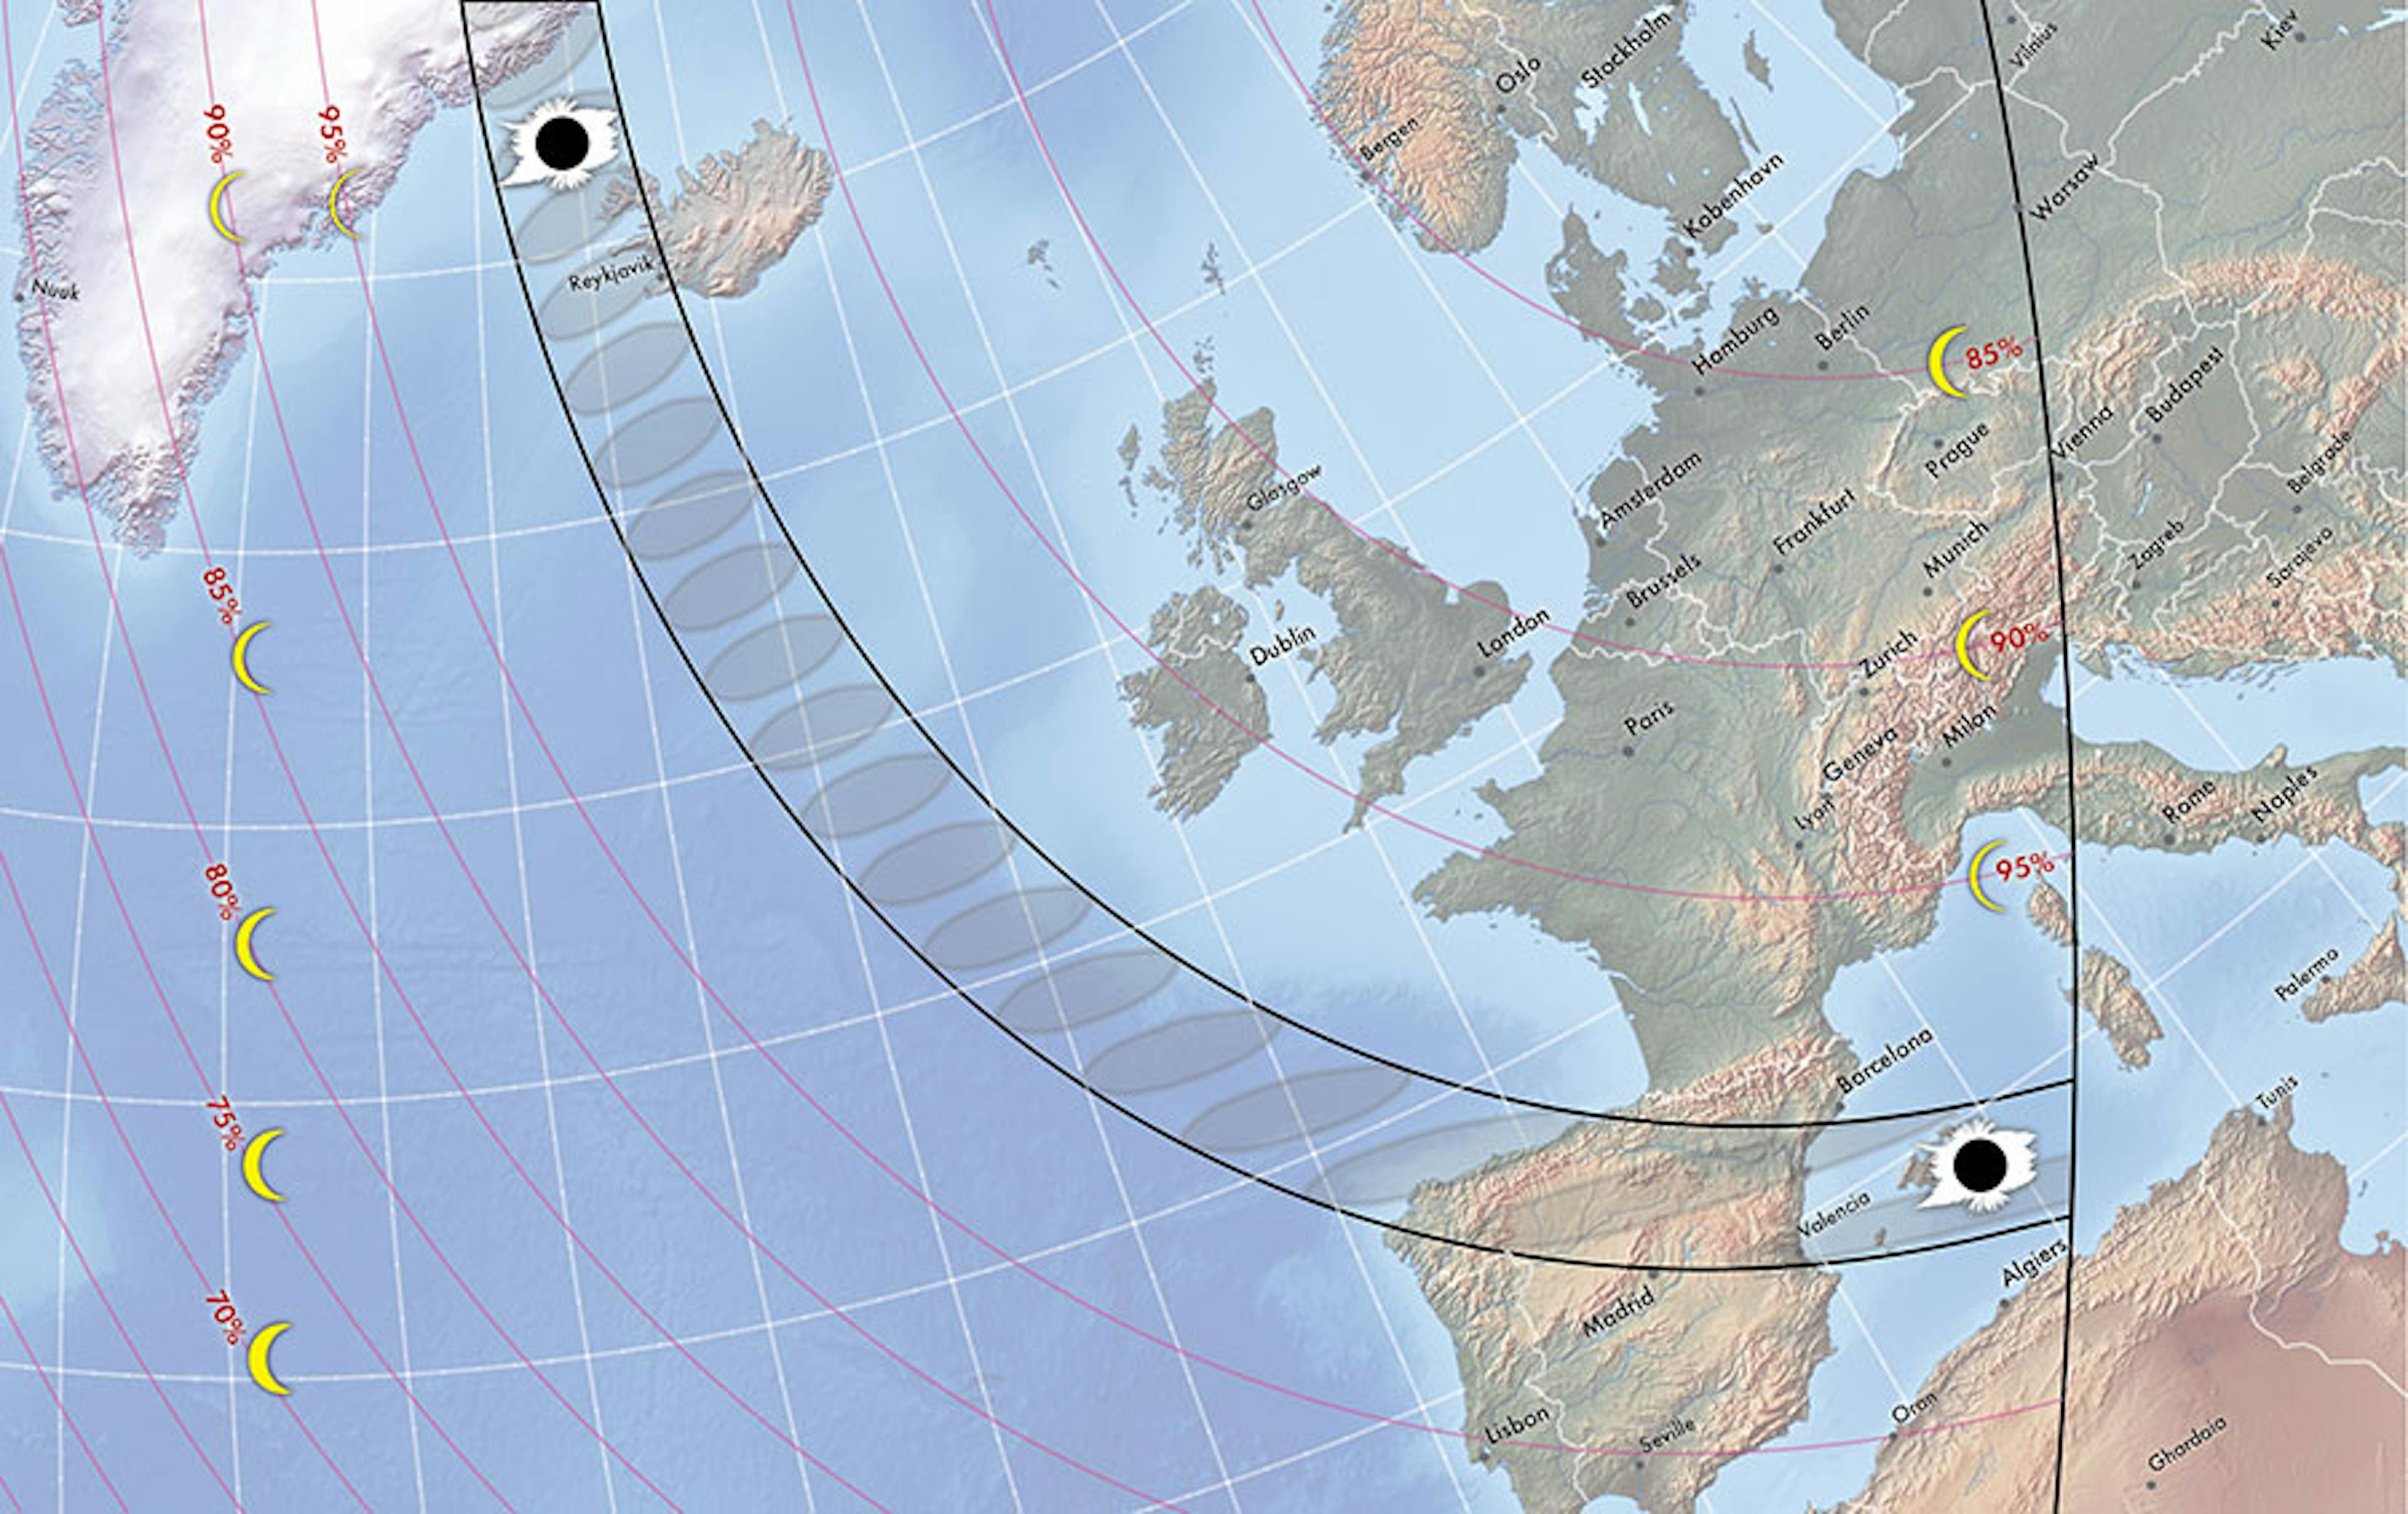 The path of totality sweeps near Iceland and over Spain on August 12, 2026. Michael Zeiler / GreatAmericanEclipse.com